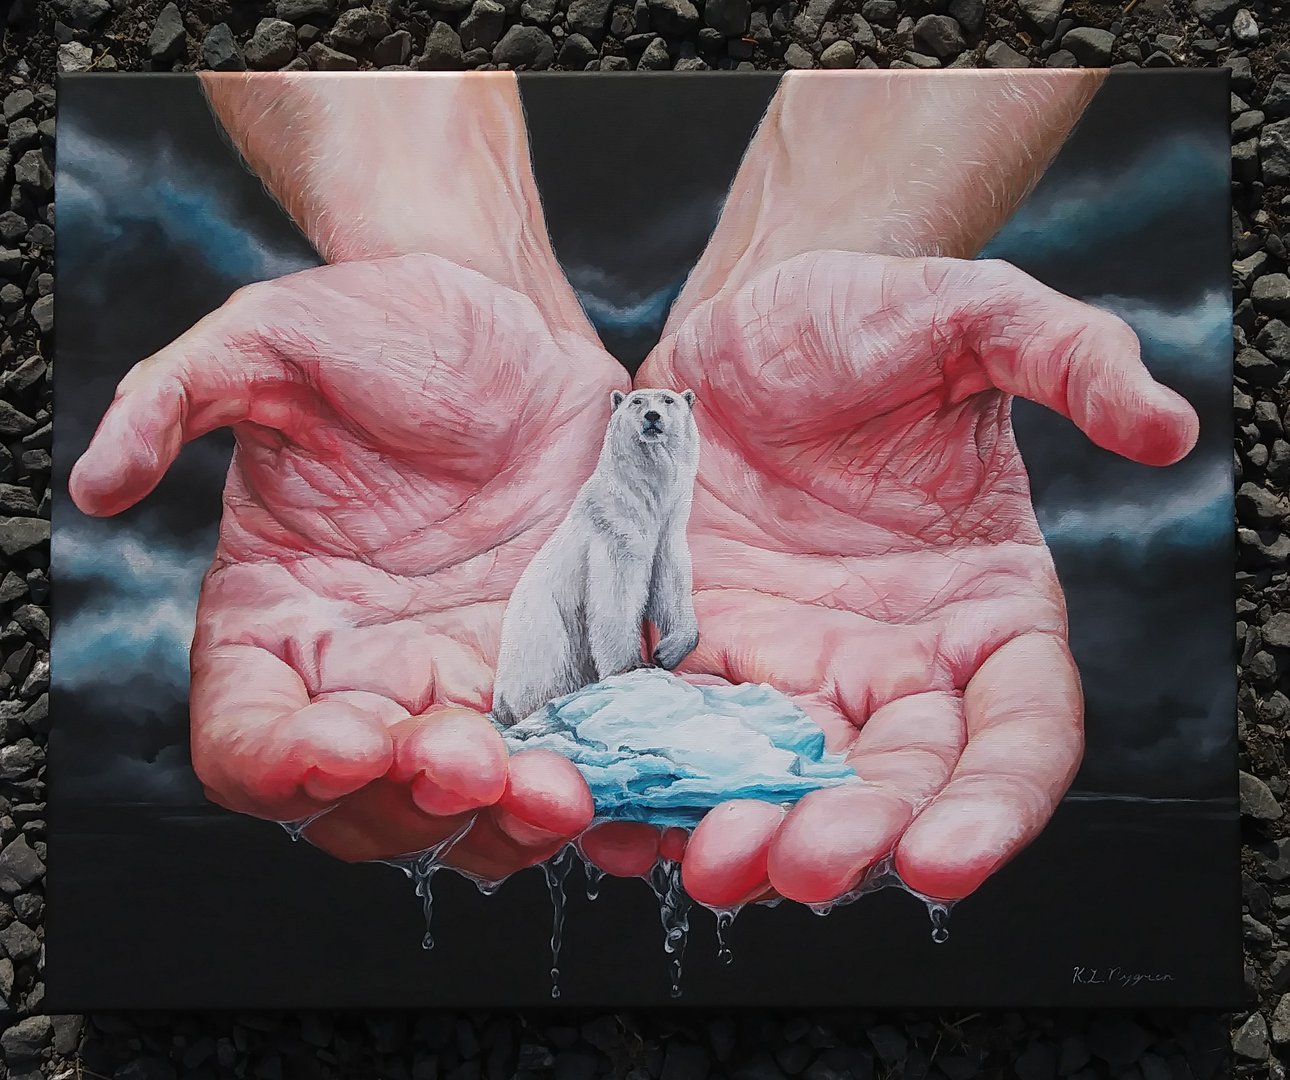 painting of a pair of human hands holding a polar bear atop melting ice